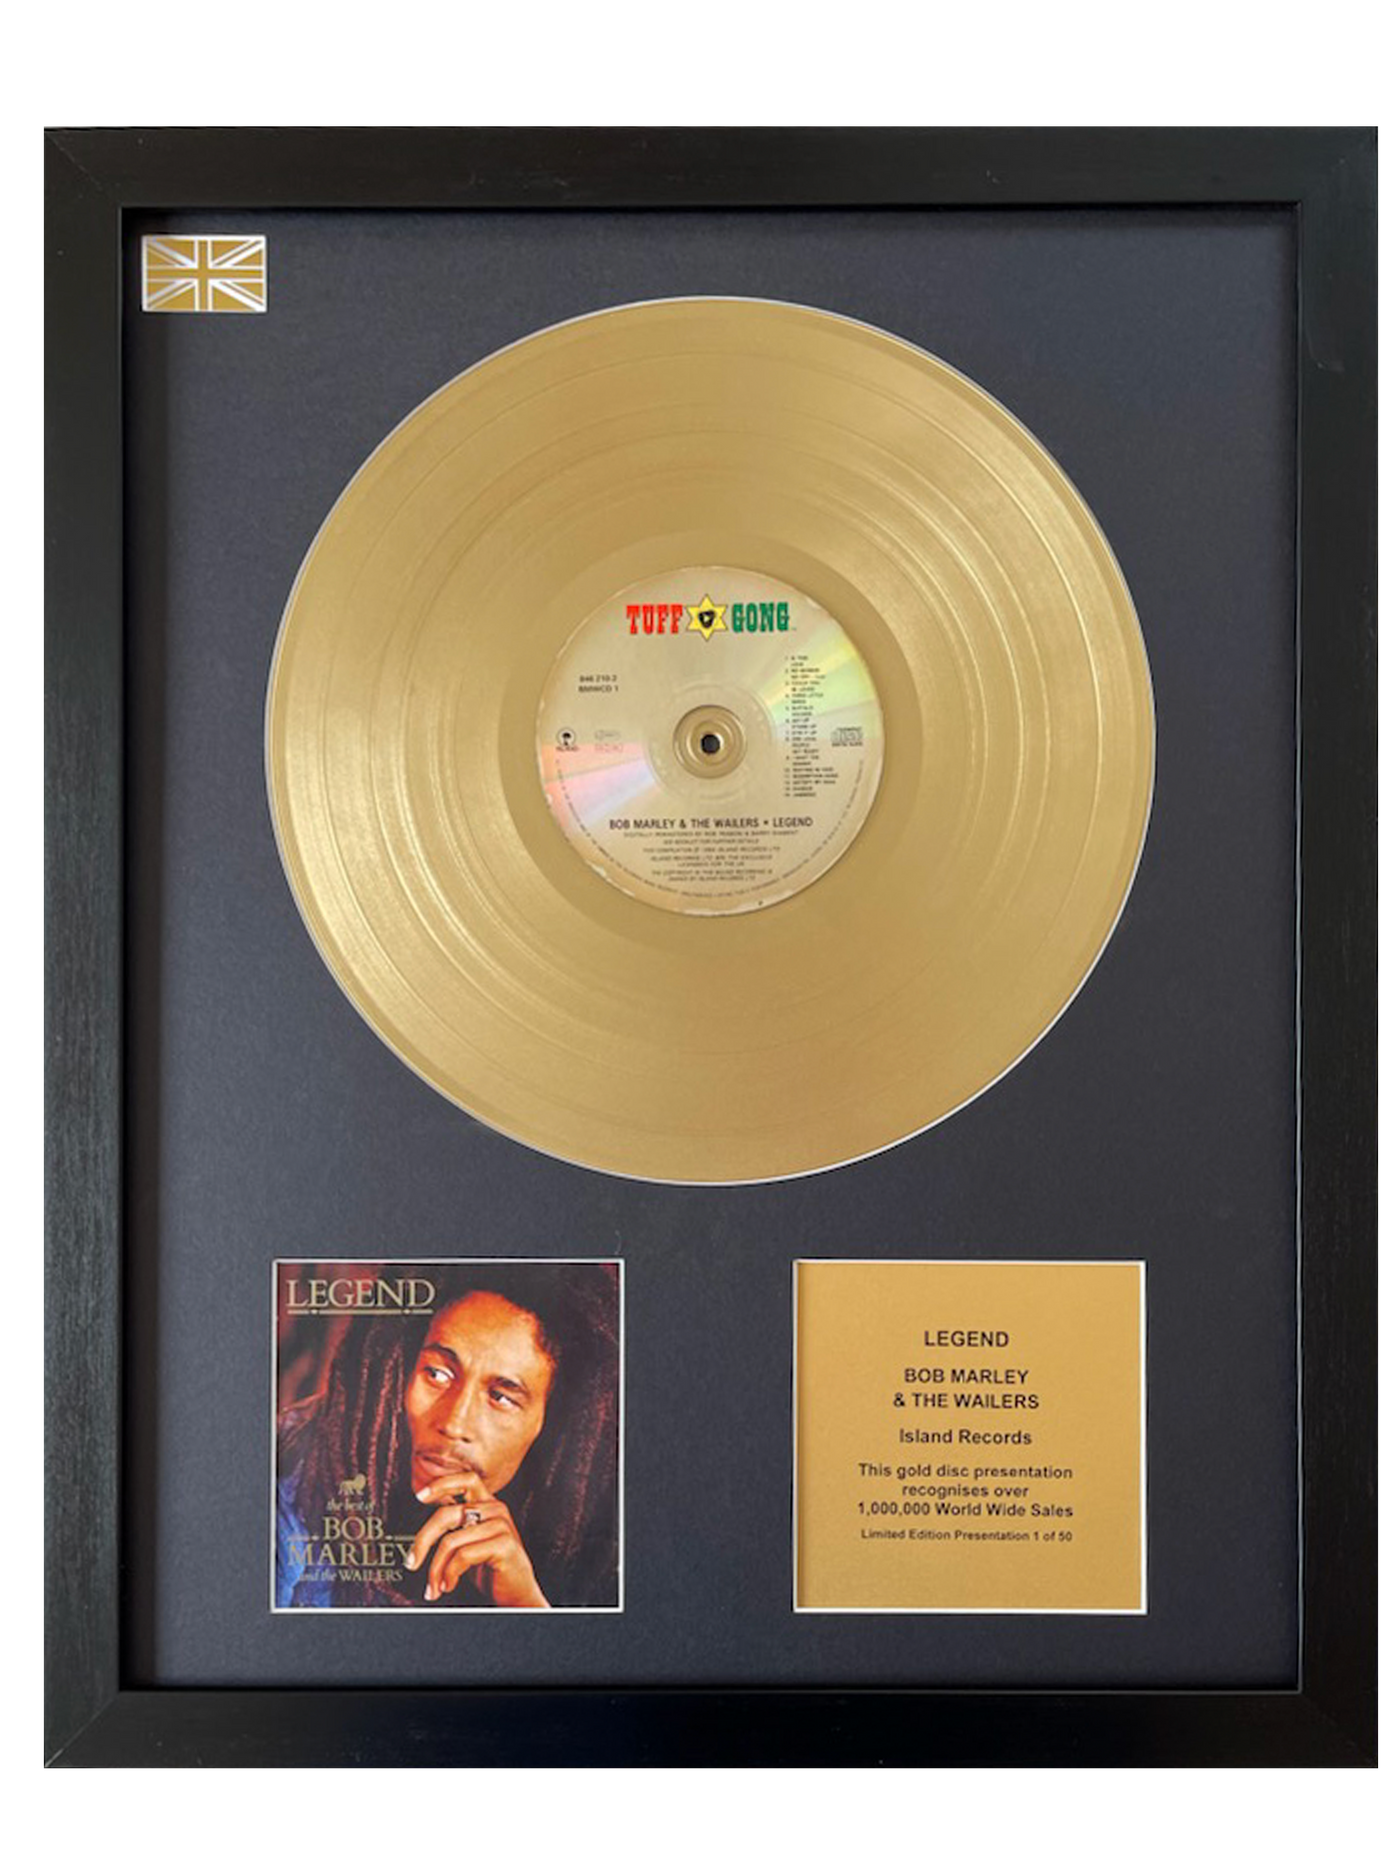 bob marley and the wailers legend deluxe edition